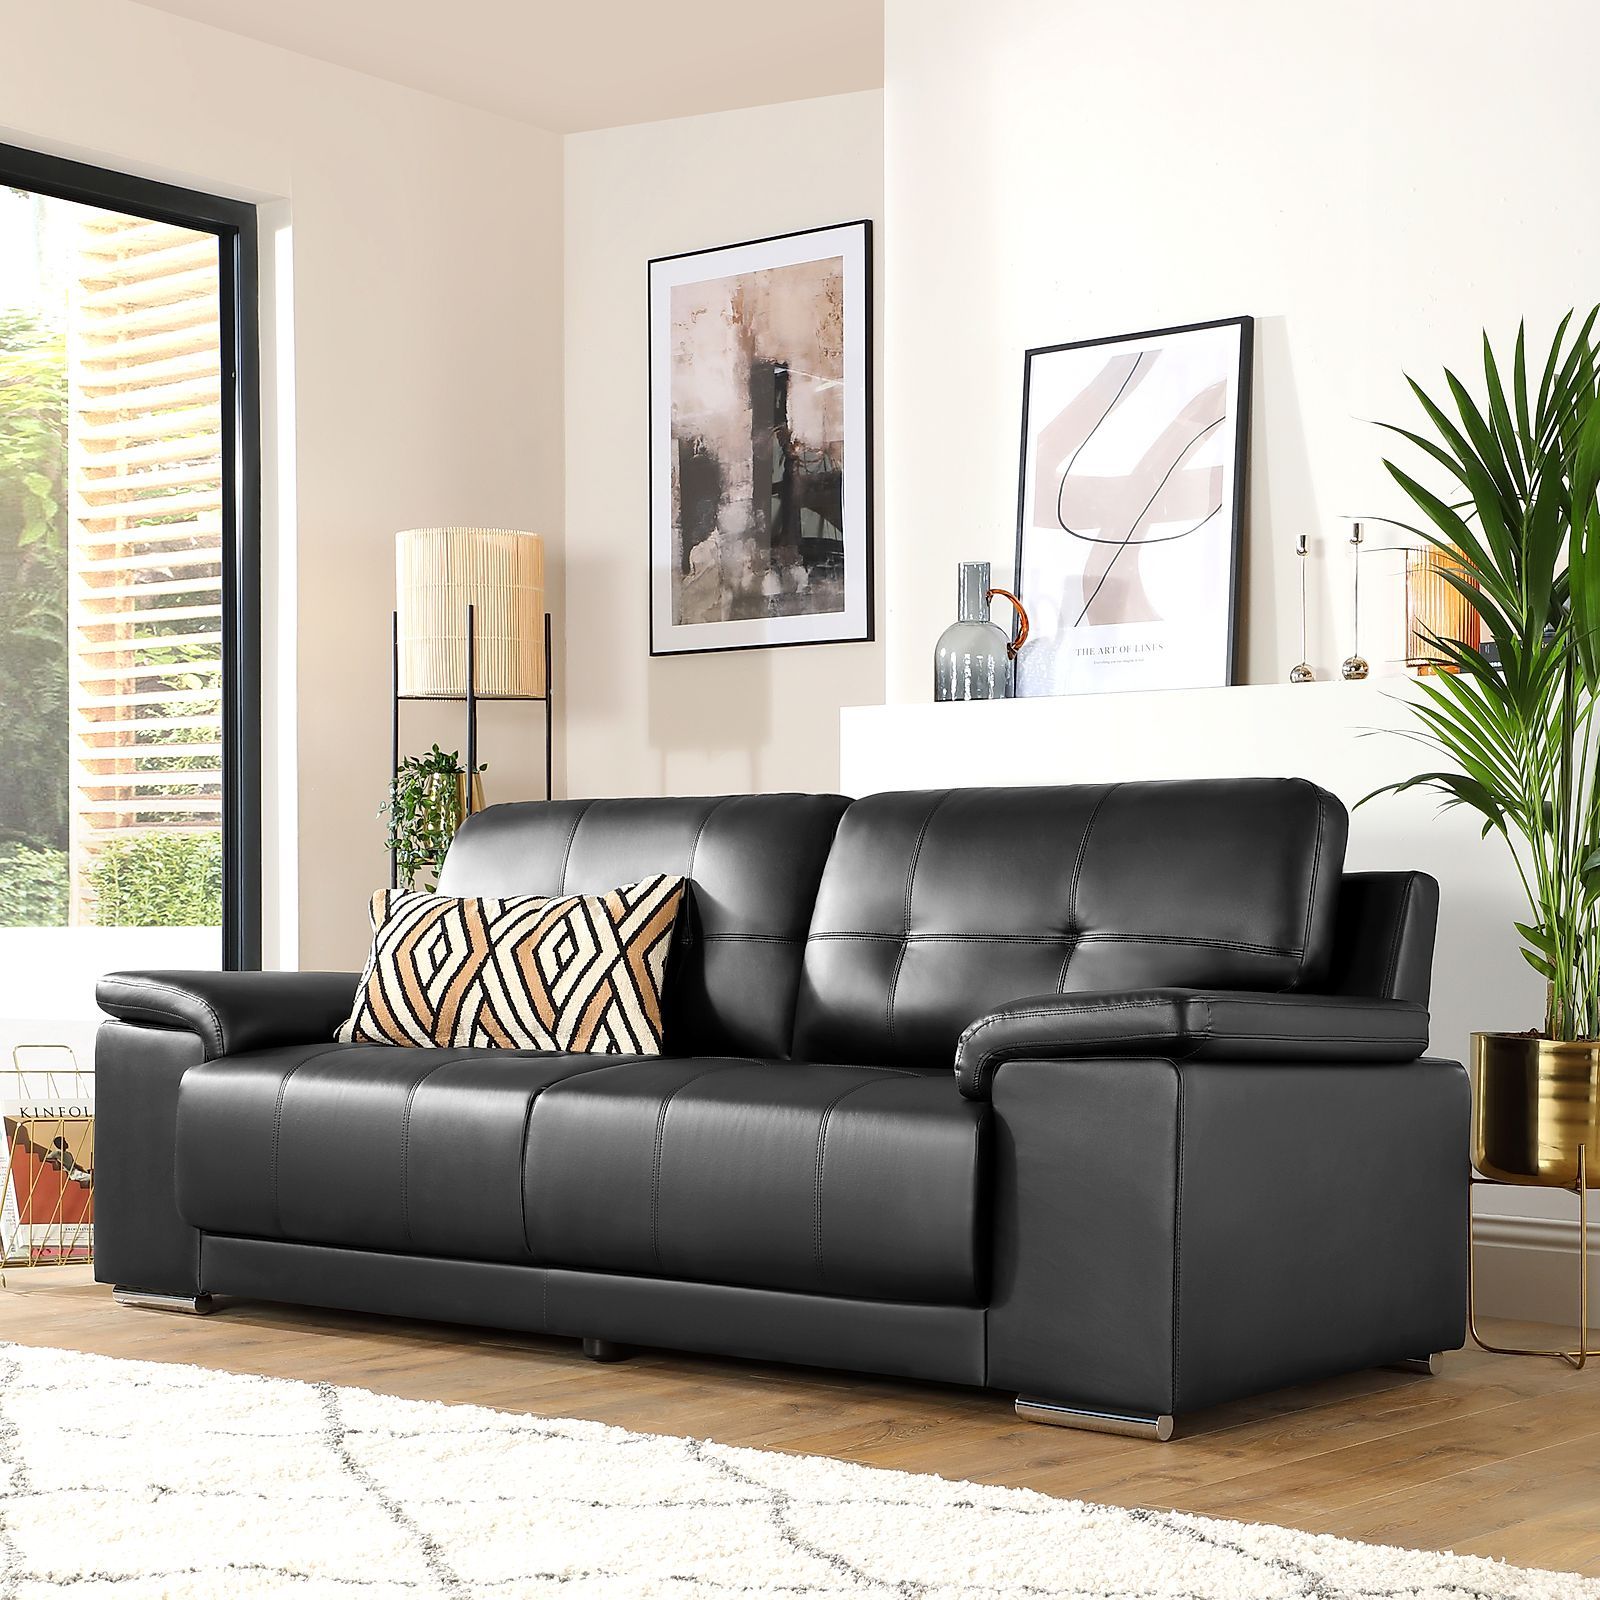 Kansas Black Leather 3 Seater Sofa | Furniture Choice With Sofas In Black (View 4 of 20)